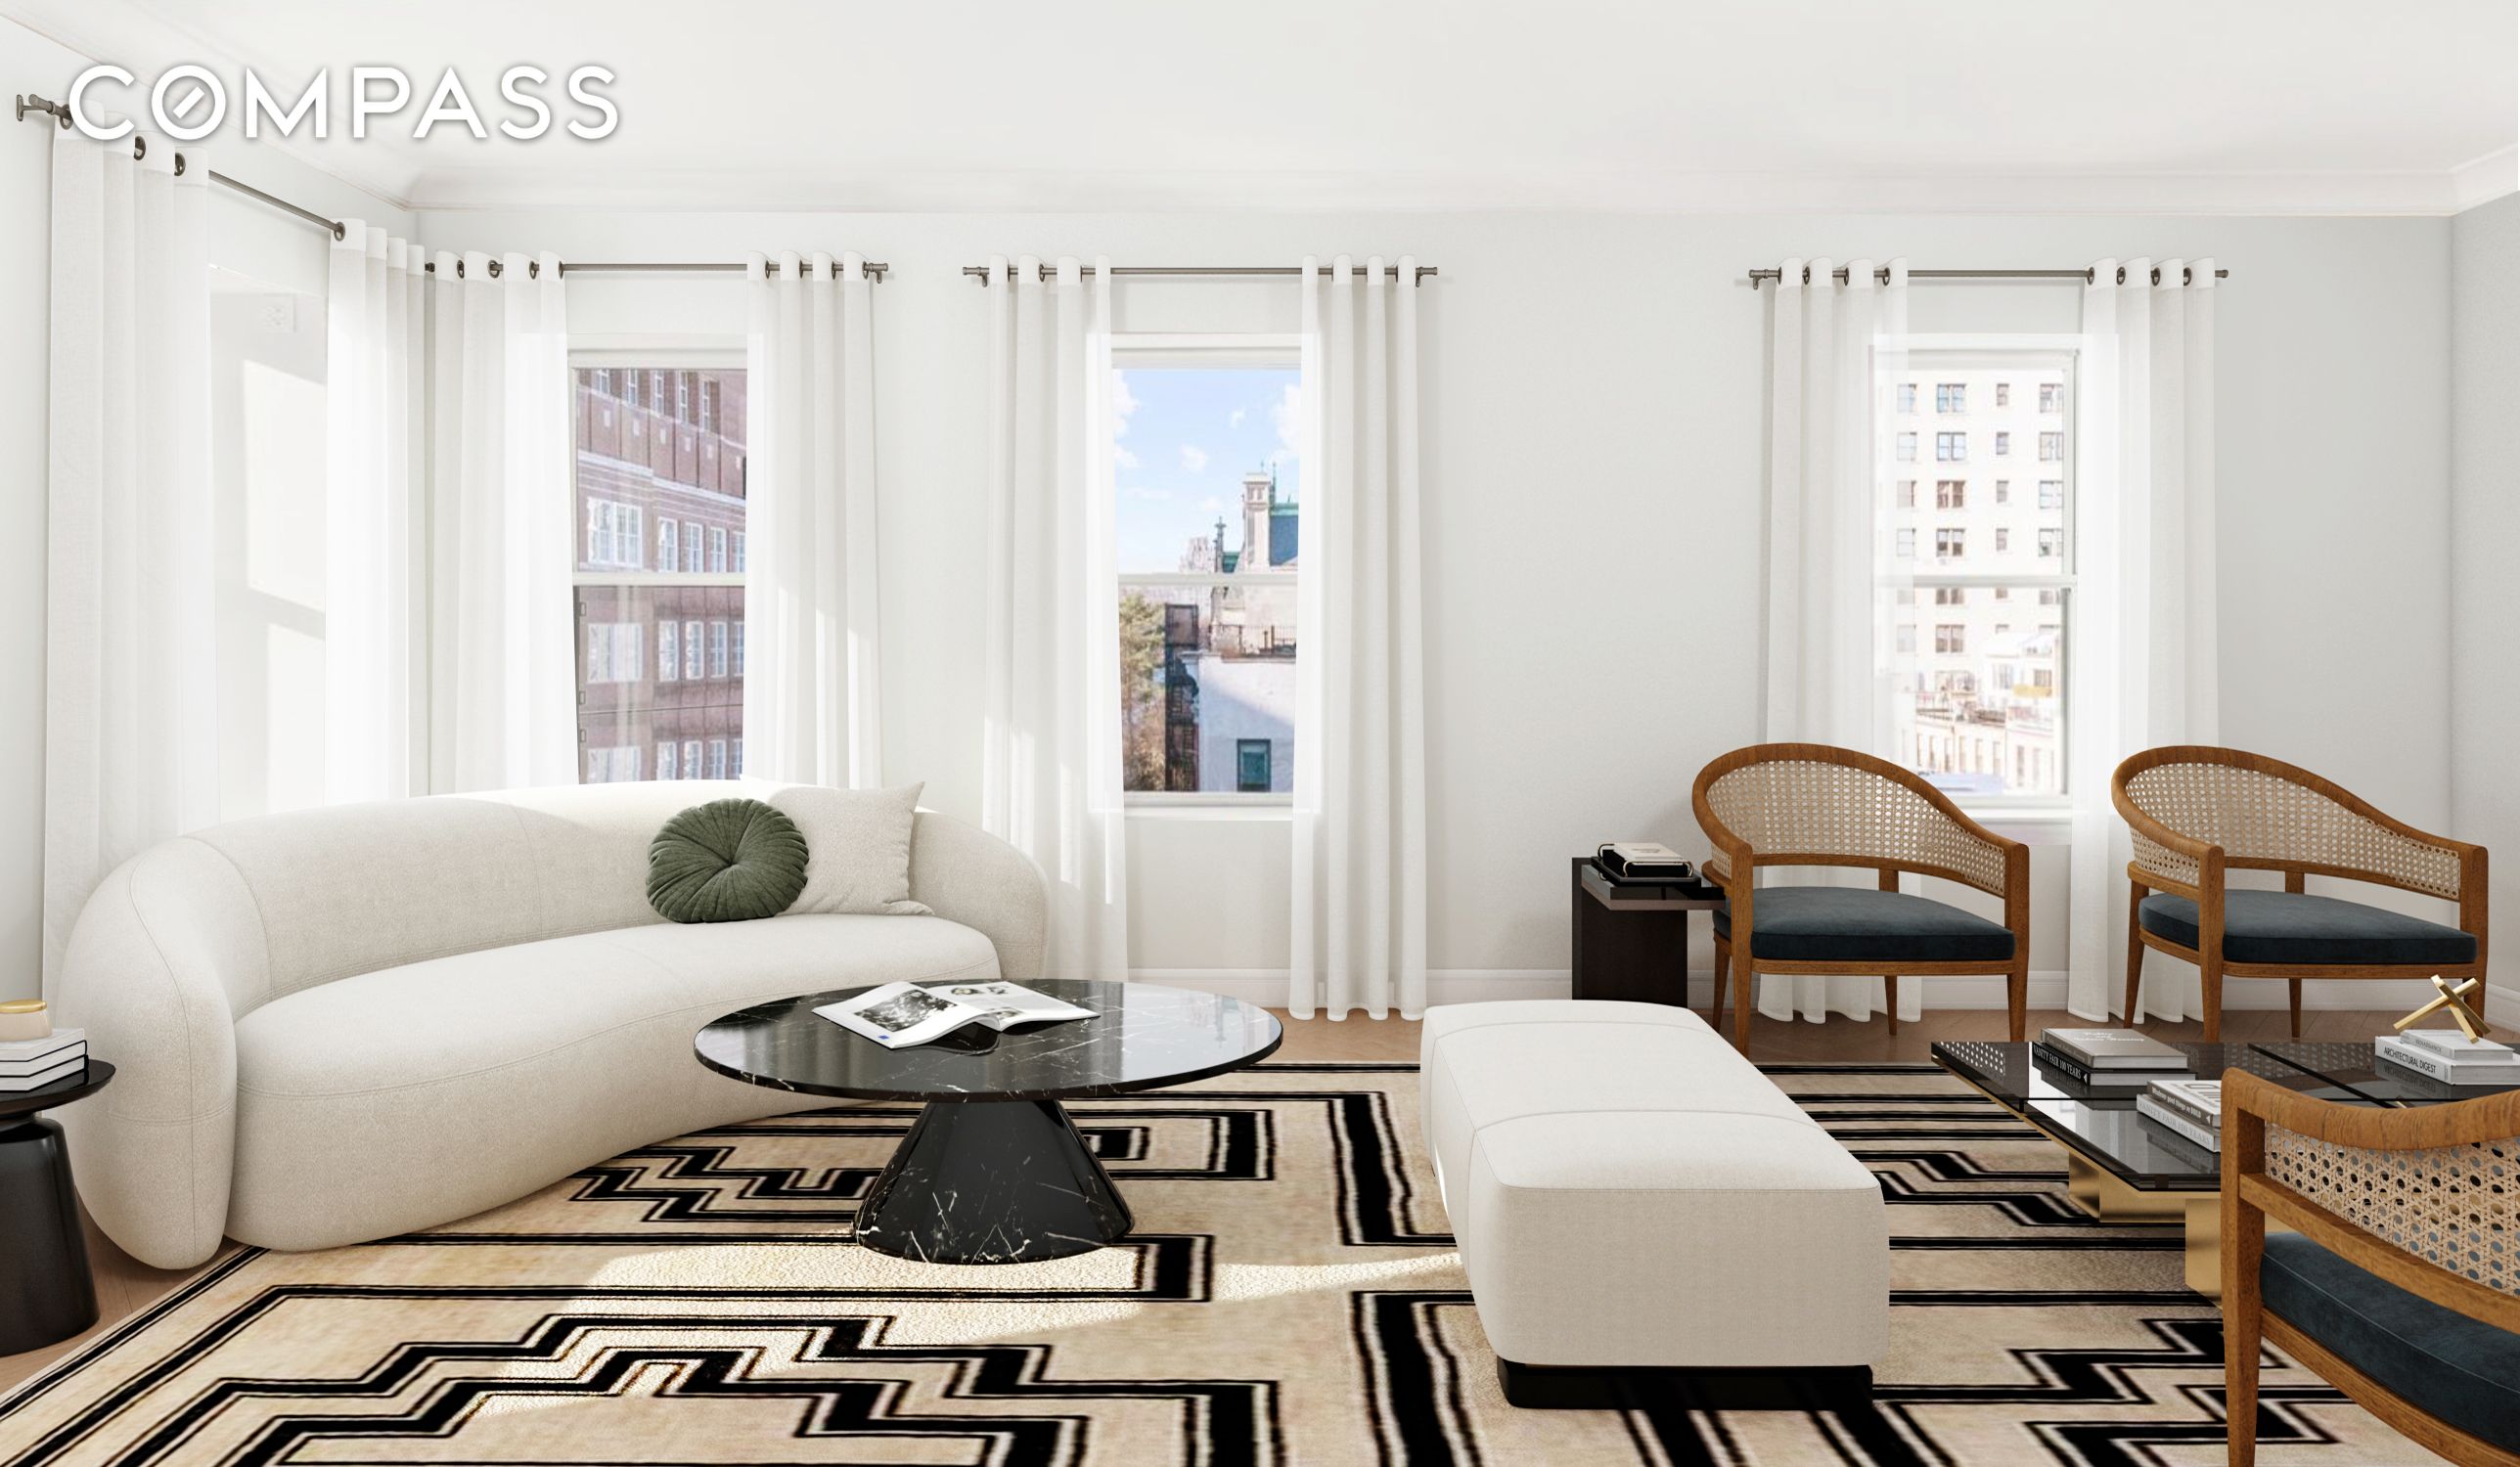 1295 Madison Avenue 3A, Upper East Side, Upper East Side, NYC - 6 Bedrooms  
5.5 Bathrooms  
16 Rooms - 